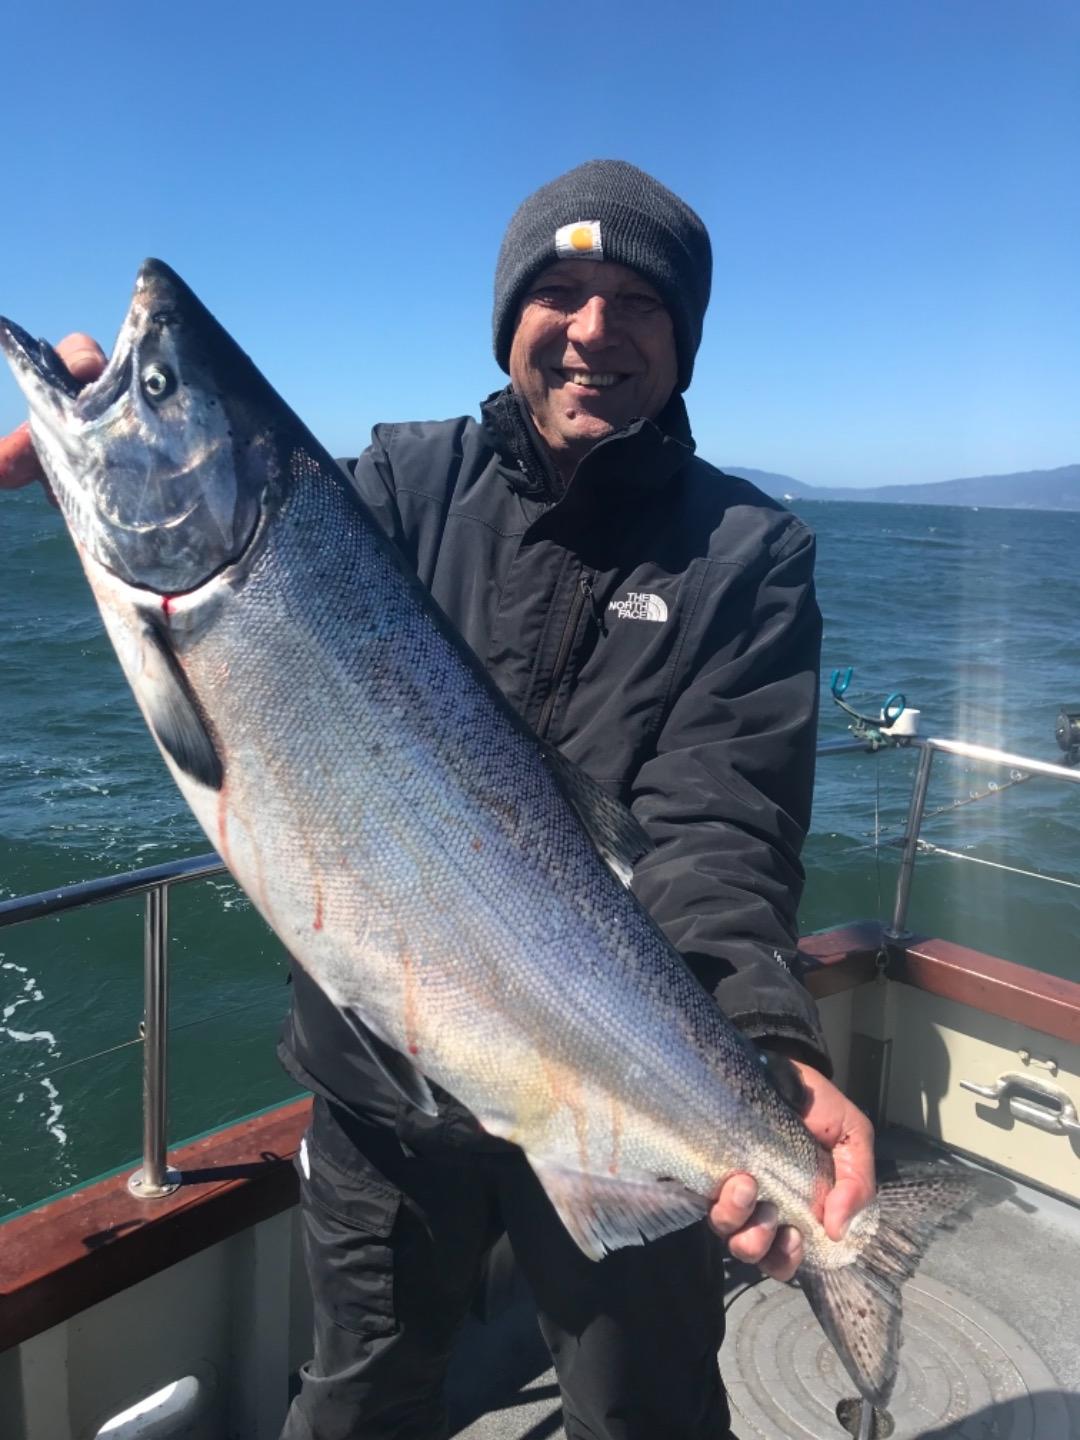 Did some looking around. Salmon to 23lbs. 